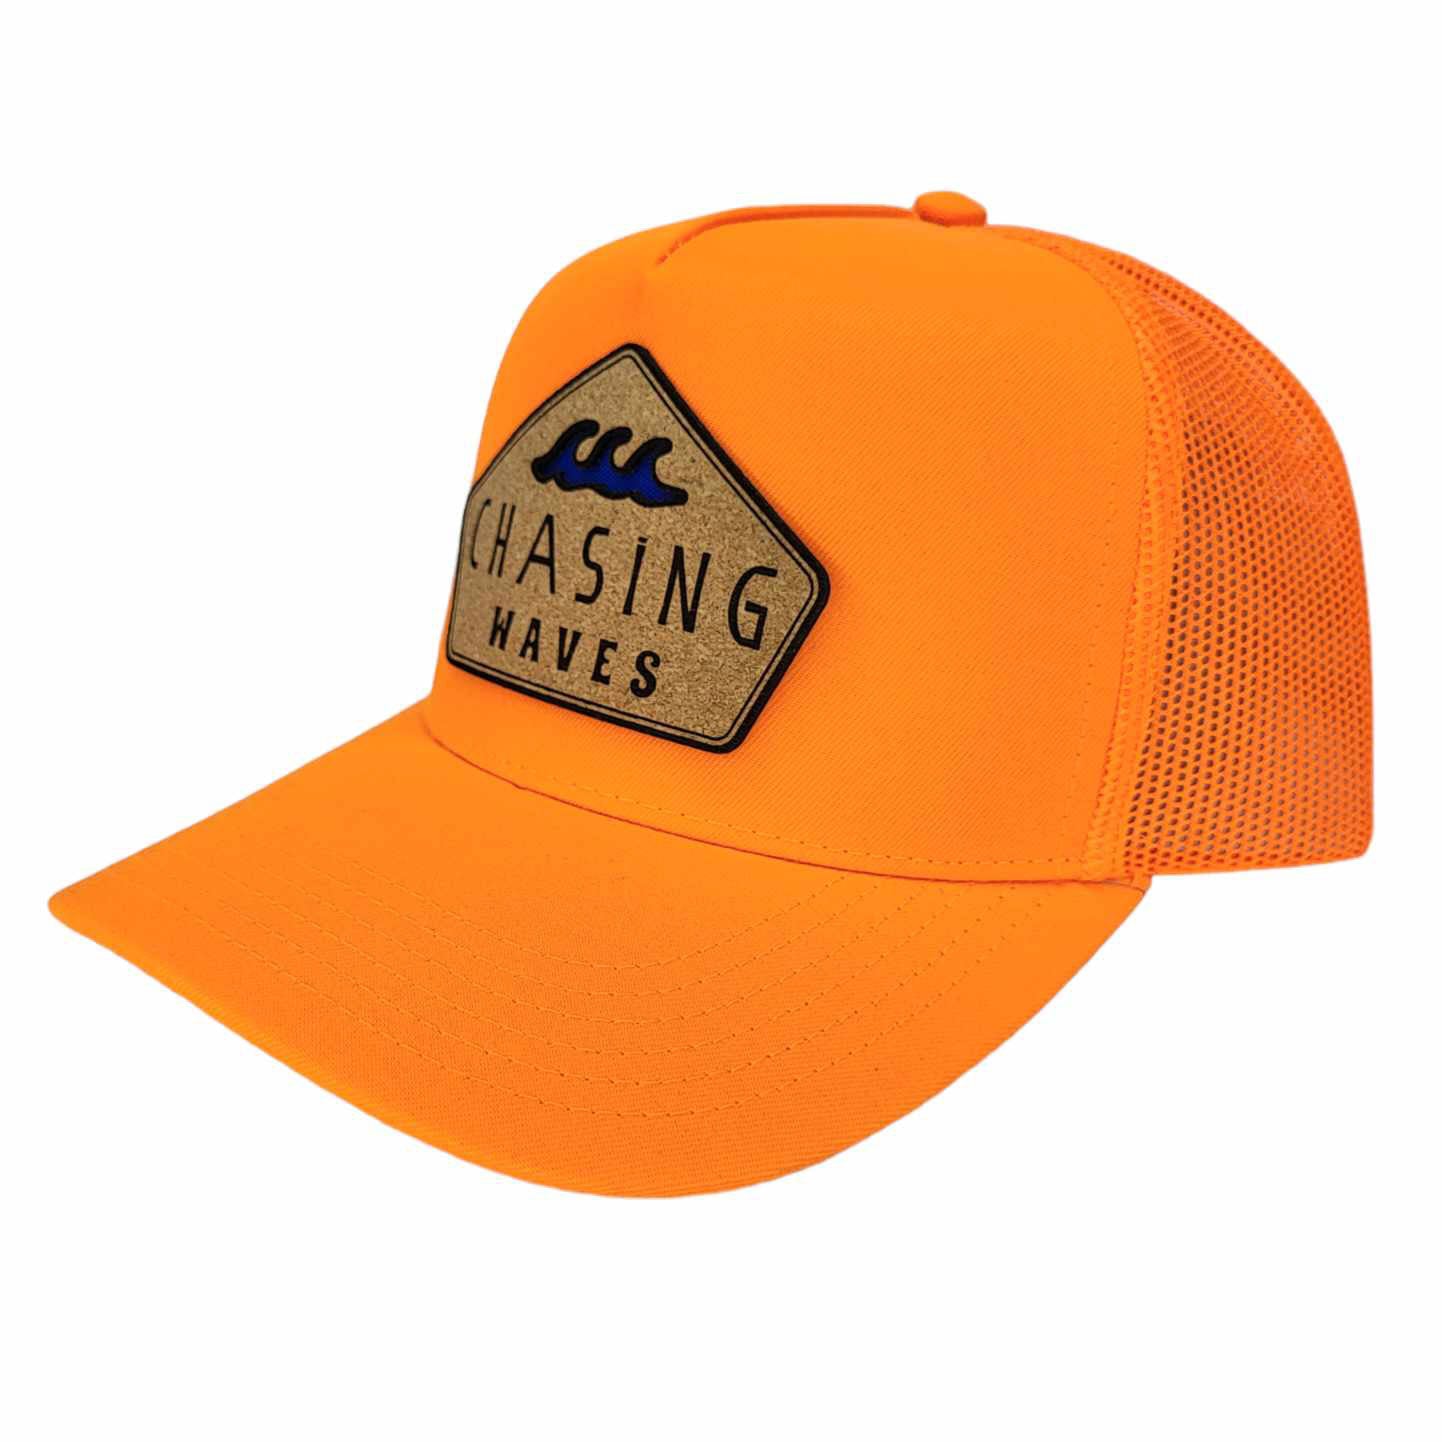 Chasing Waves Cork Patch Rope Hat